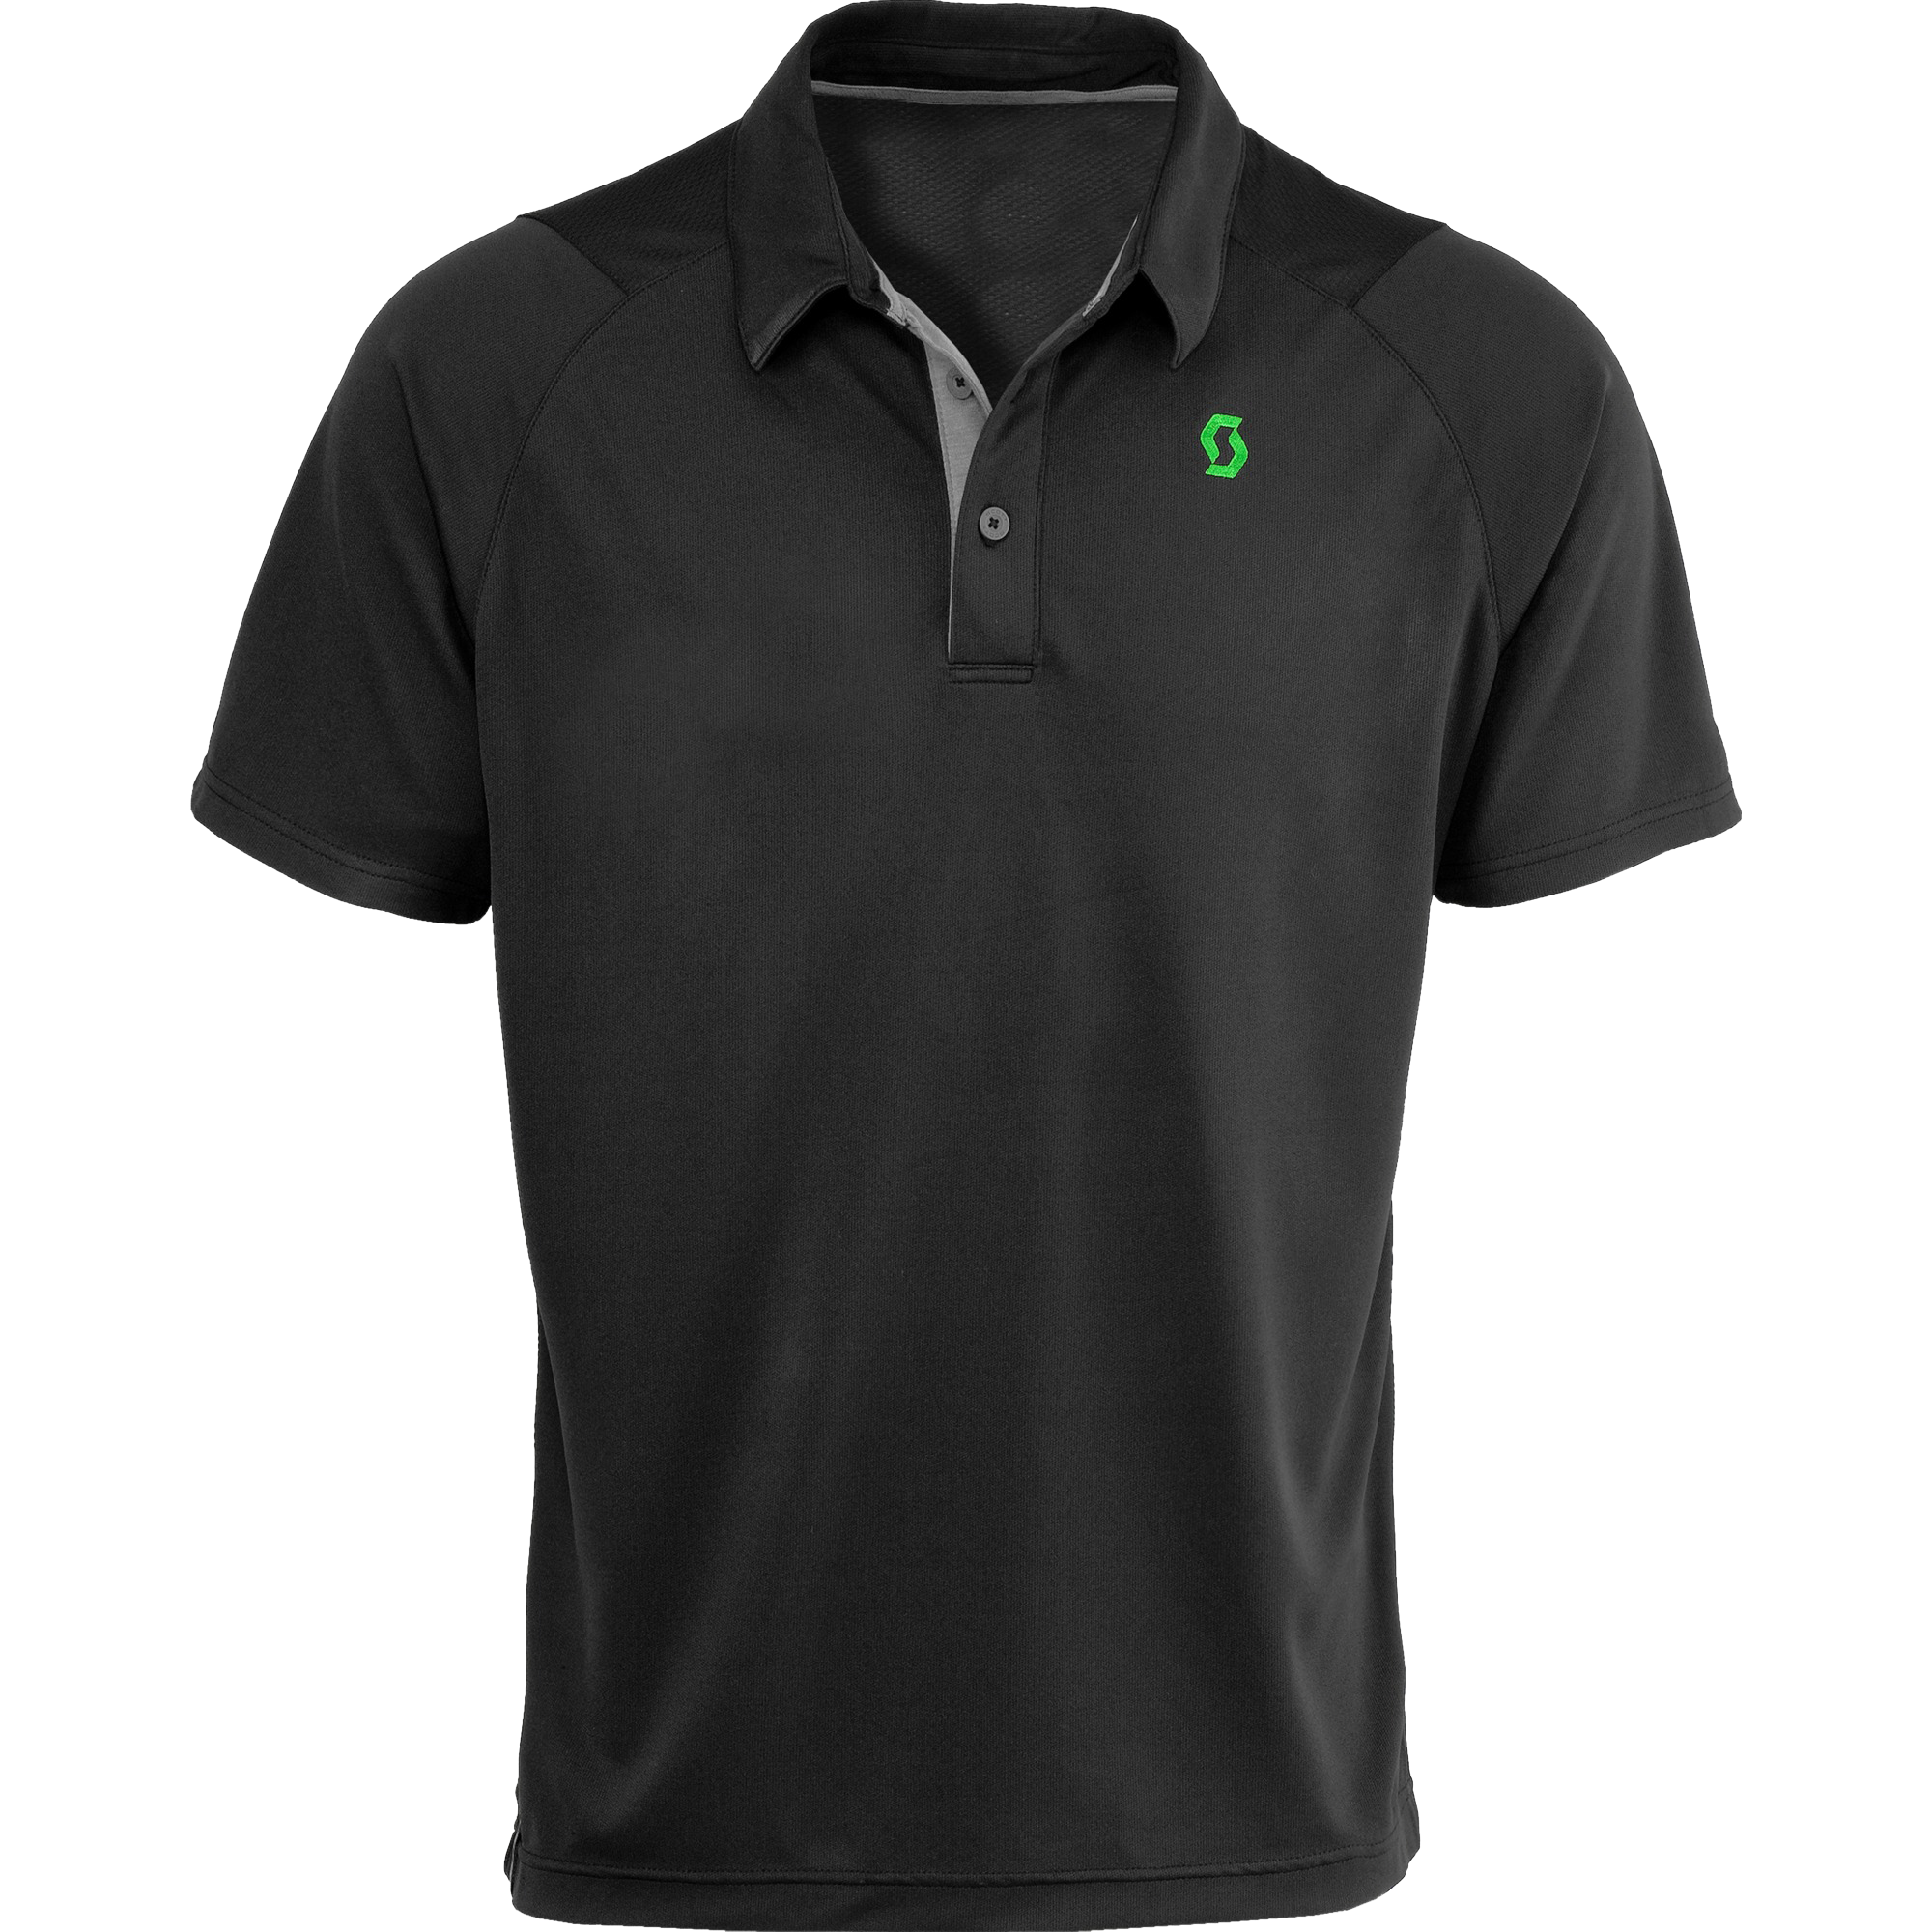 Polo Shirt Png Photos   Polo Shirt Png - Poloshirt, Transparent background PNG HD thumbnail